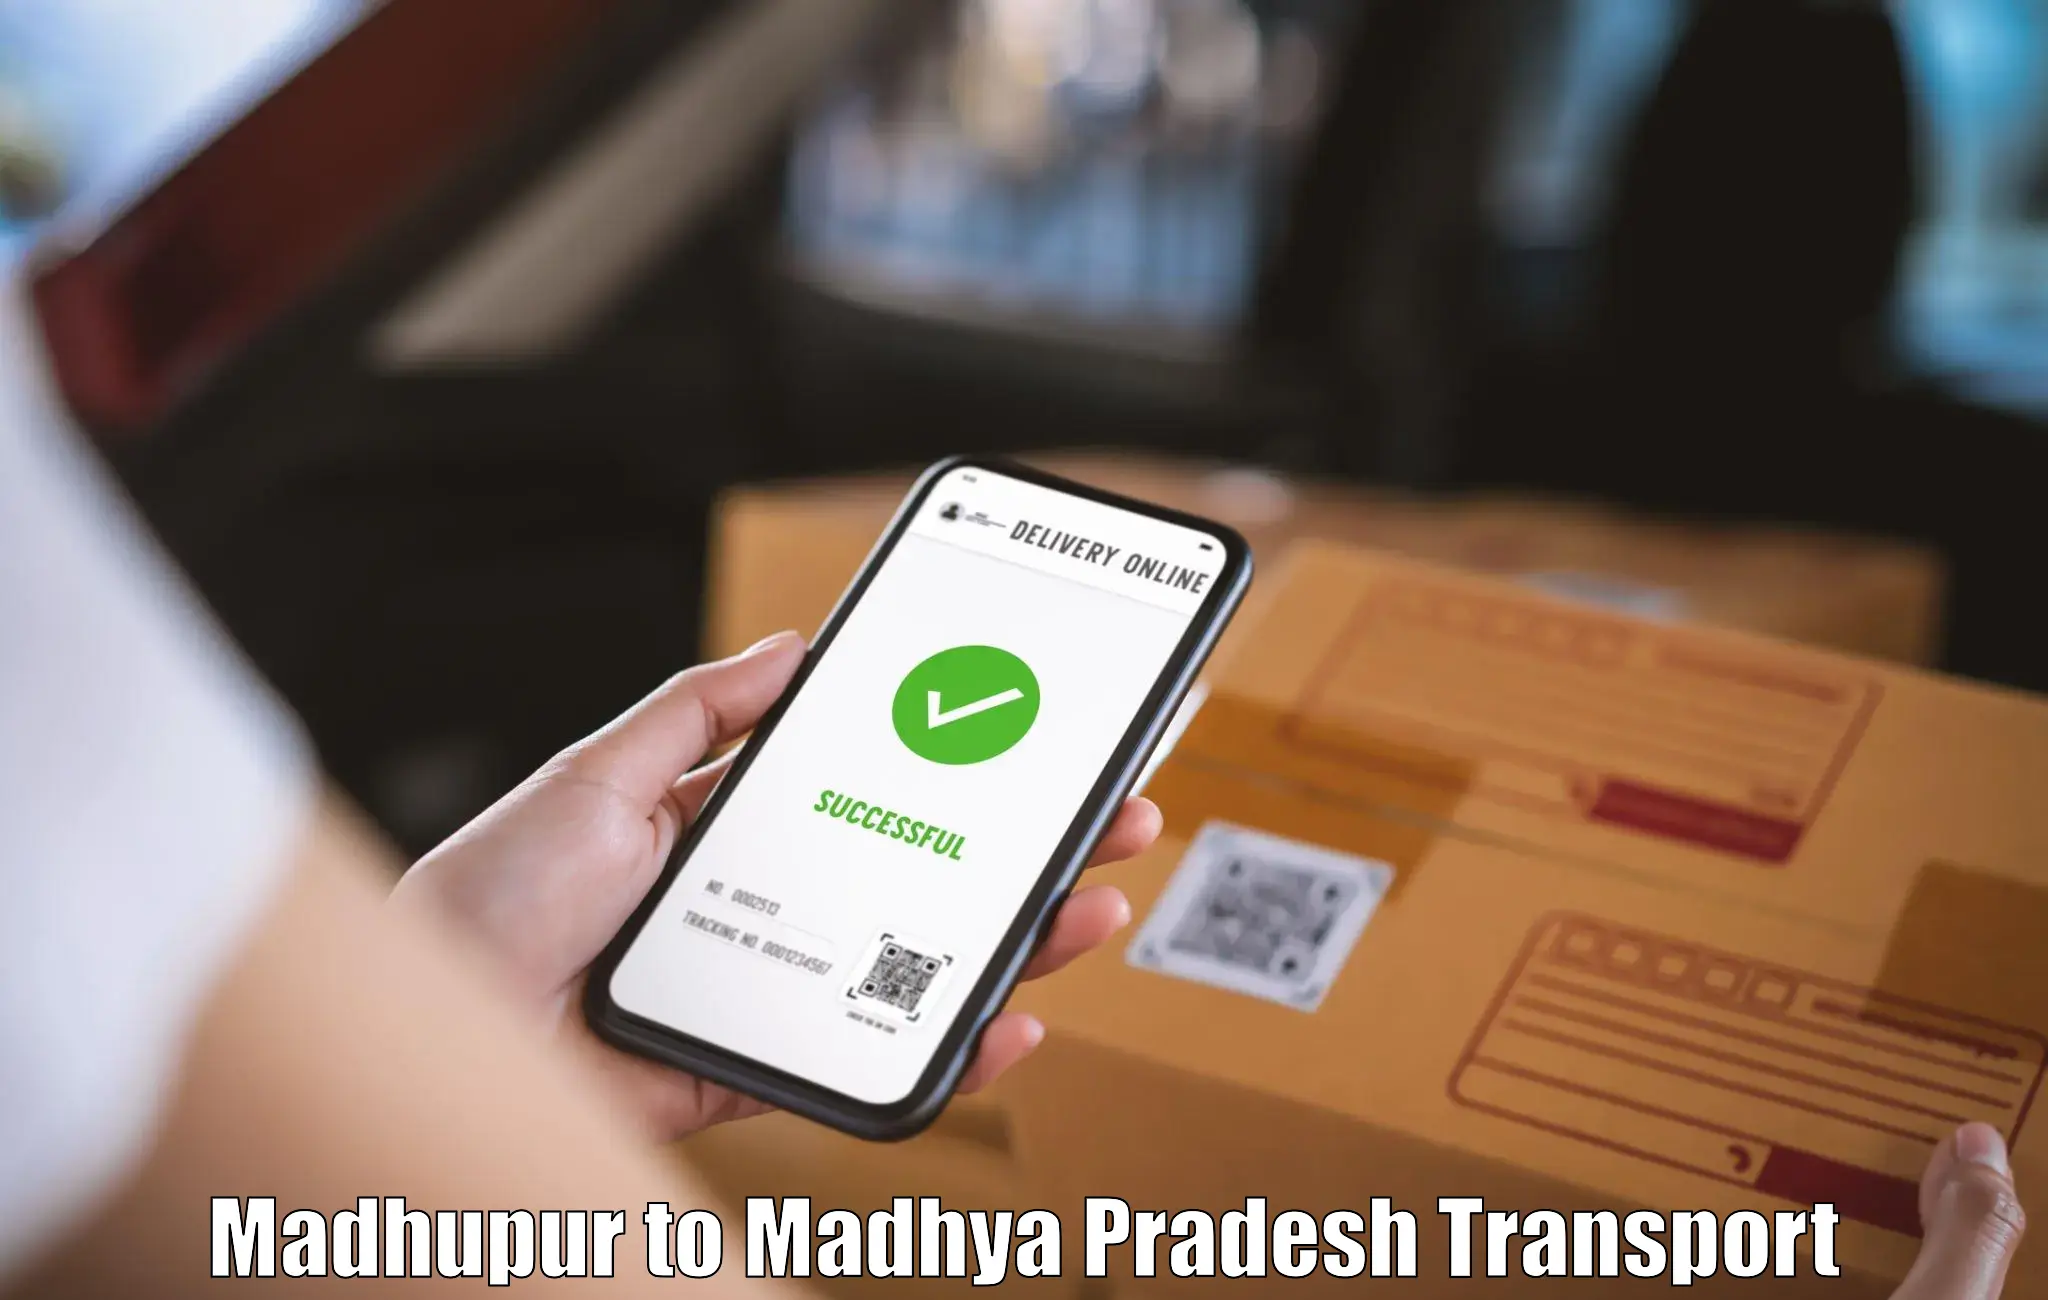 Transport in sharing Madhupur to Gotegaon